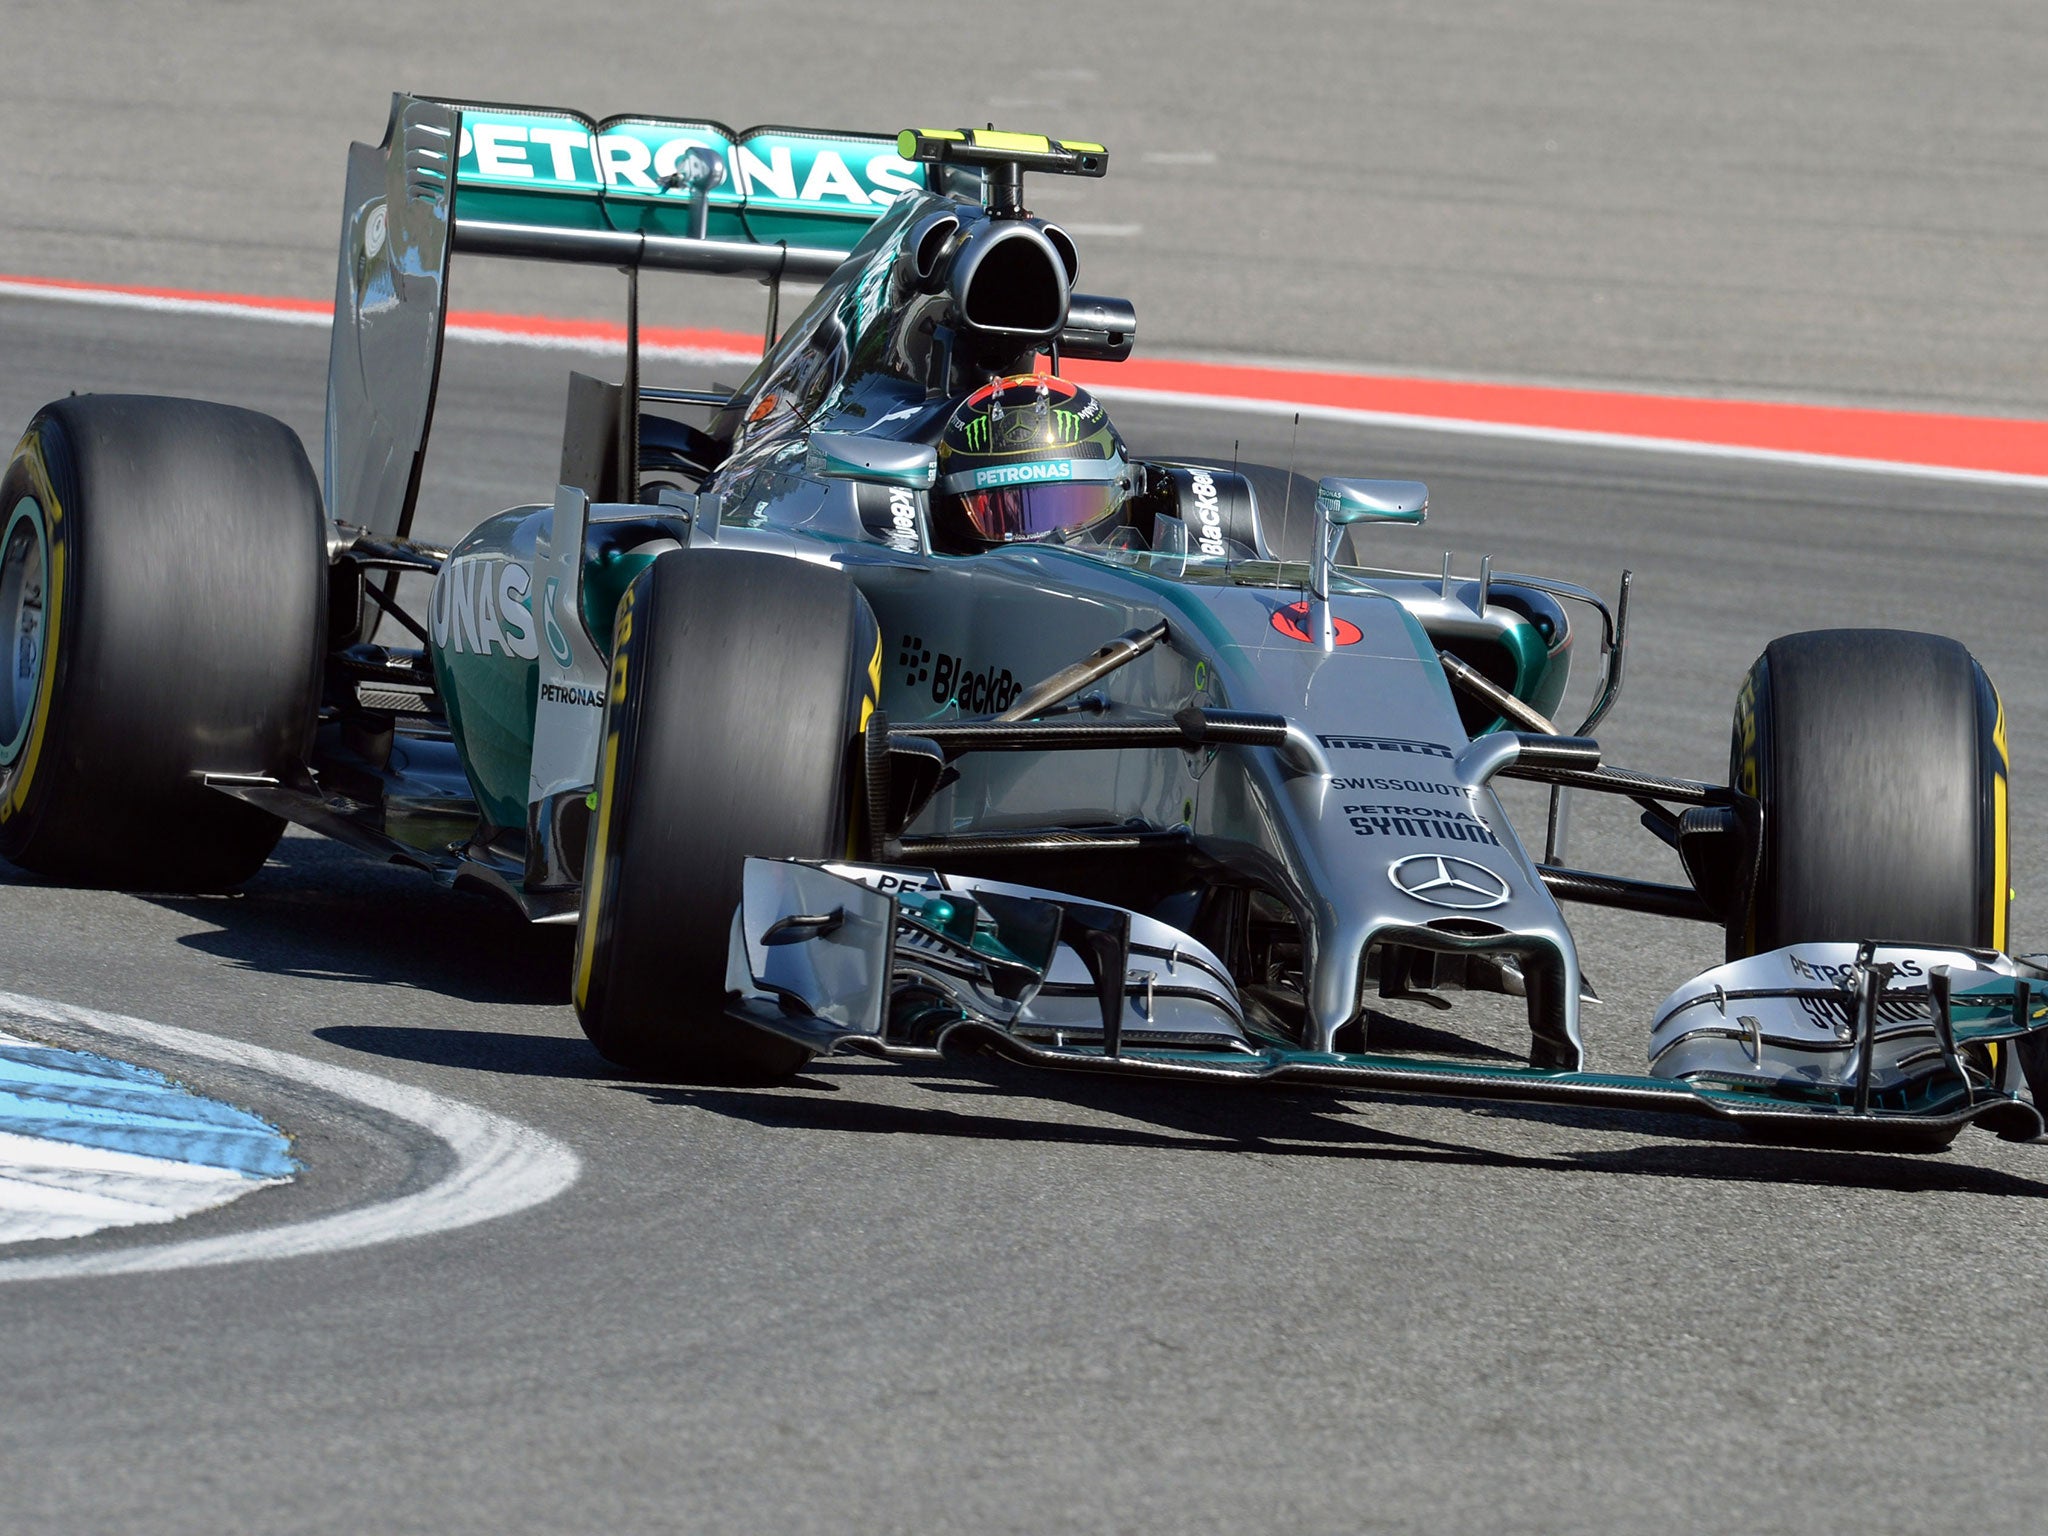 Nico Rosberg topped the timesheets after first practice